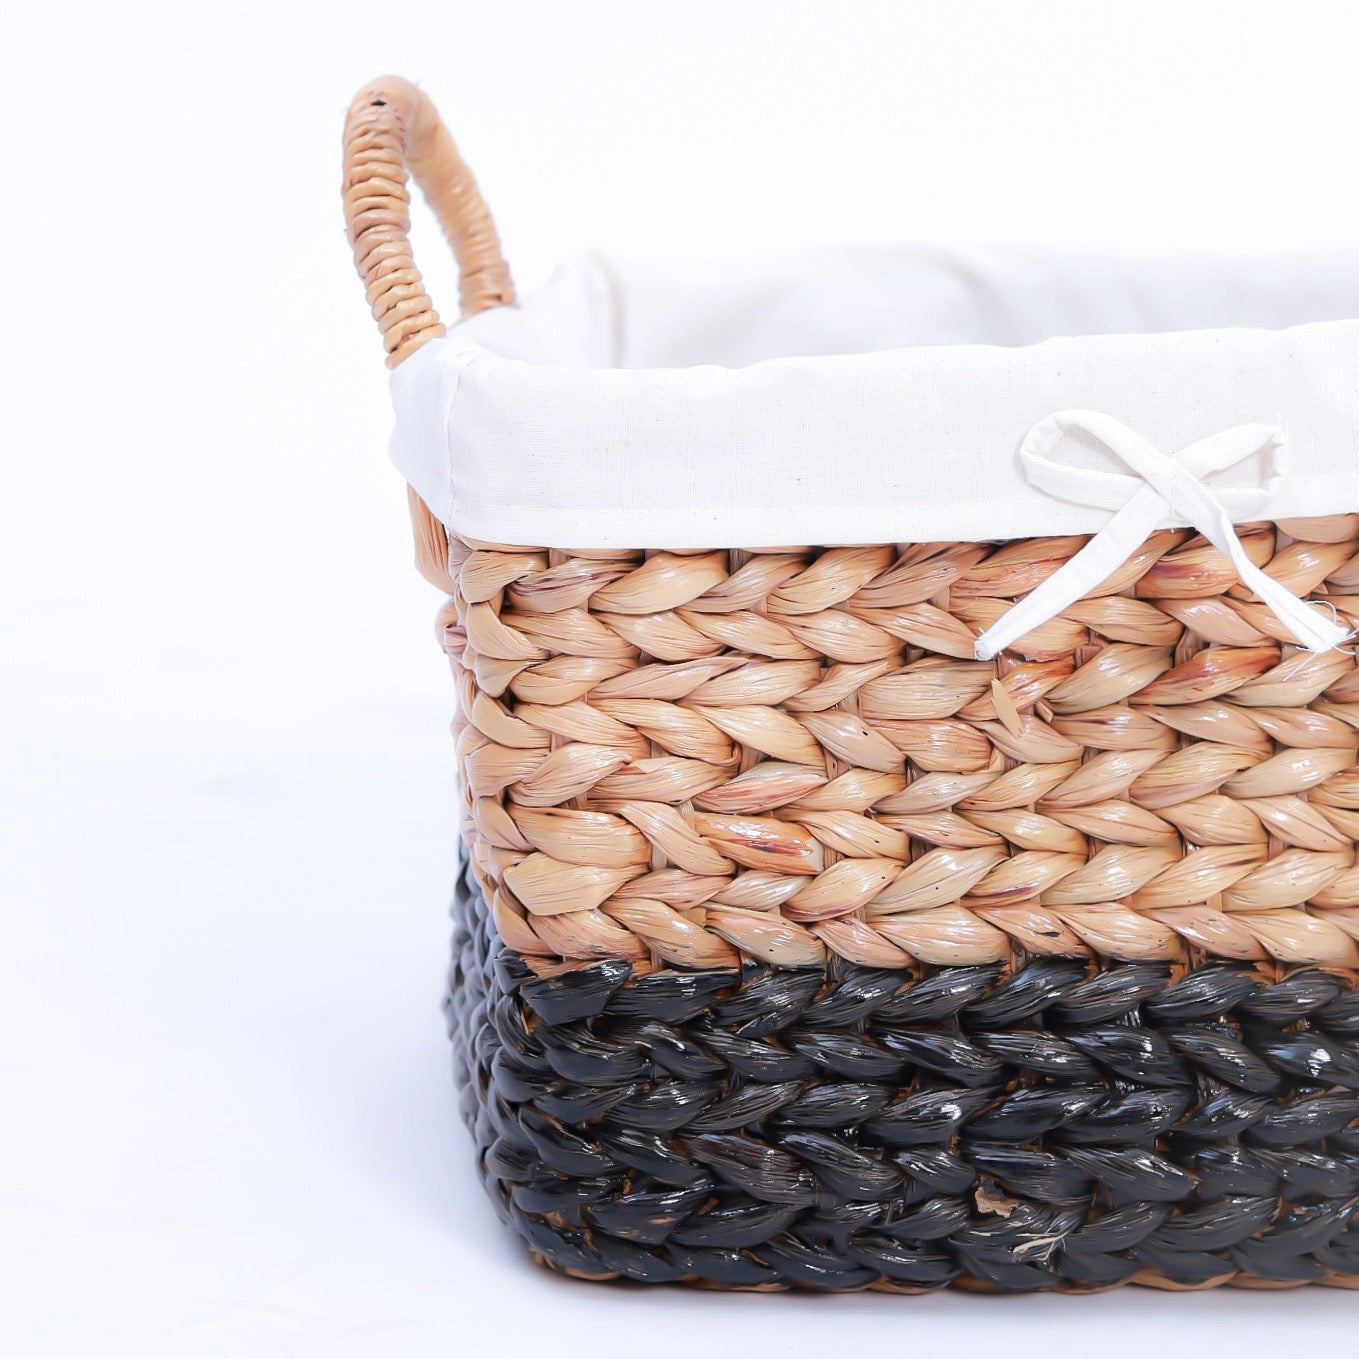 Baskets for clothes, blankets